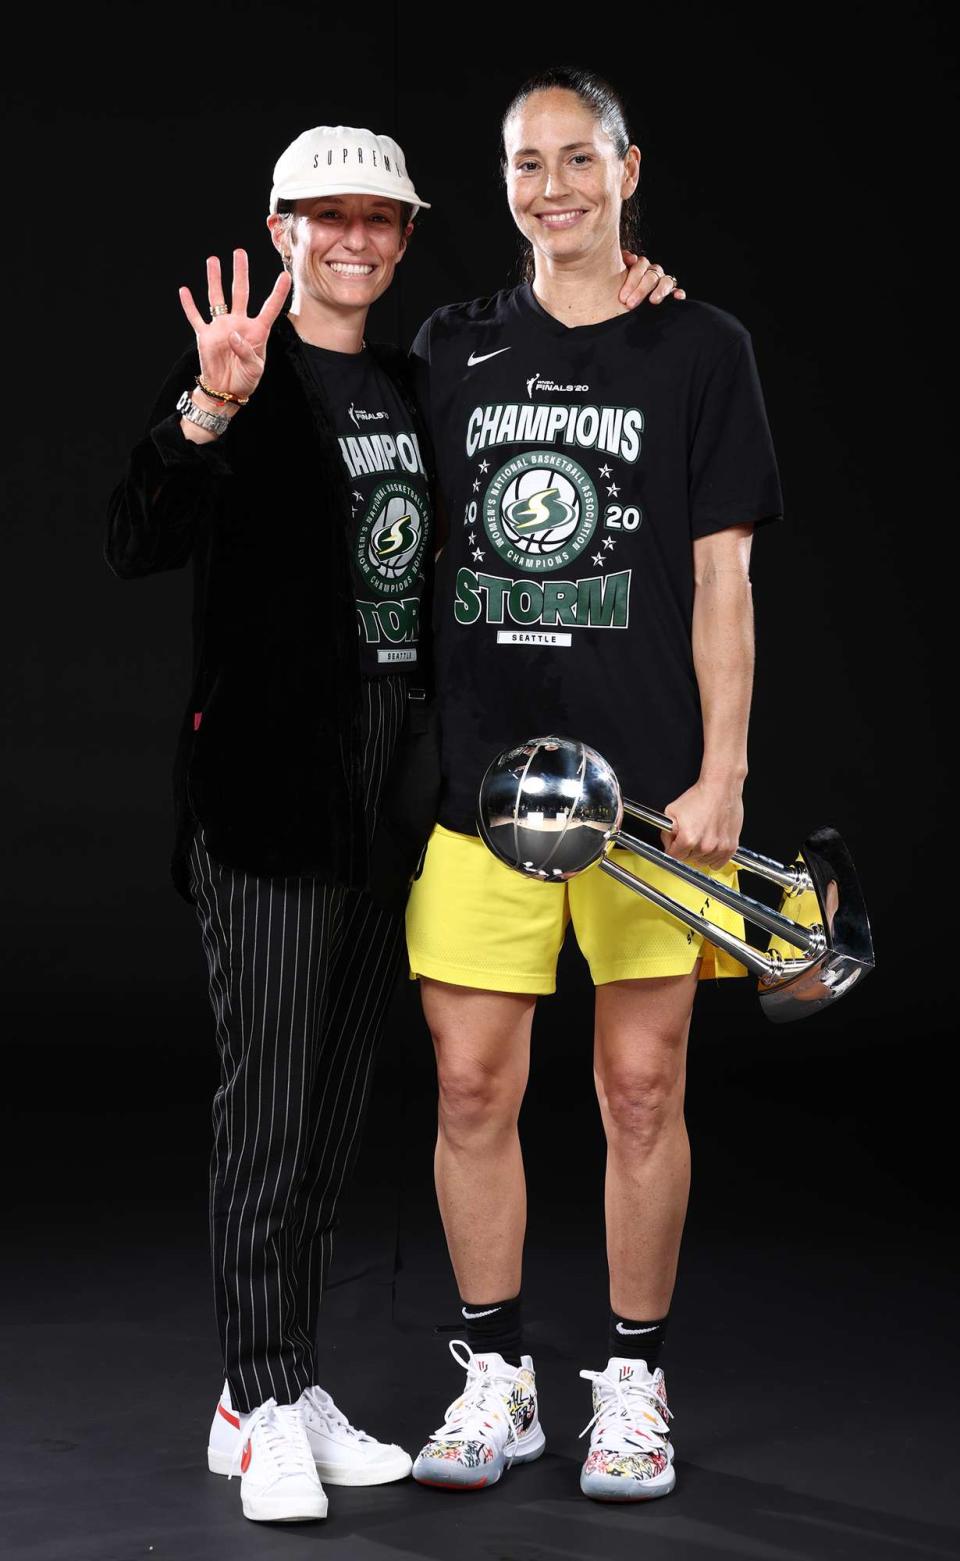 Megan Rapinoe and Sue Bird #10 of the Seattle Storm poses for a portrait with the WNBA Championship Trophy after winning Game 3 of the 2020 WNBA Finals against the Las Vegas Aces on October 6, 2020 at Feld Entertainment Center in Palmetto, Florida. NOTE TO USER: User expressly acknowledges and agrees that, by downloading and/or using this Photograph, user is consenting to the terms and conditions of the Getty Images License Agreement. Mandatory Copyright Notice: Copyright 2020 NBAE